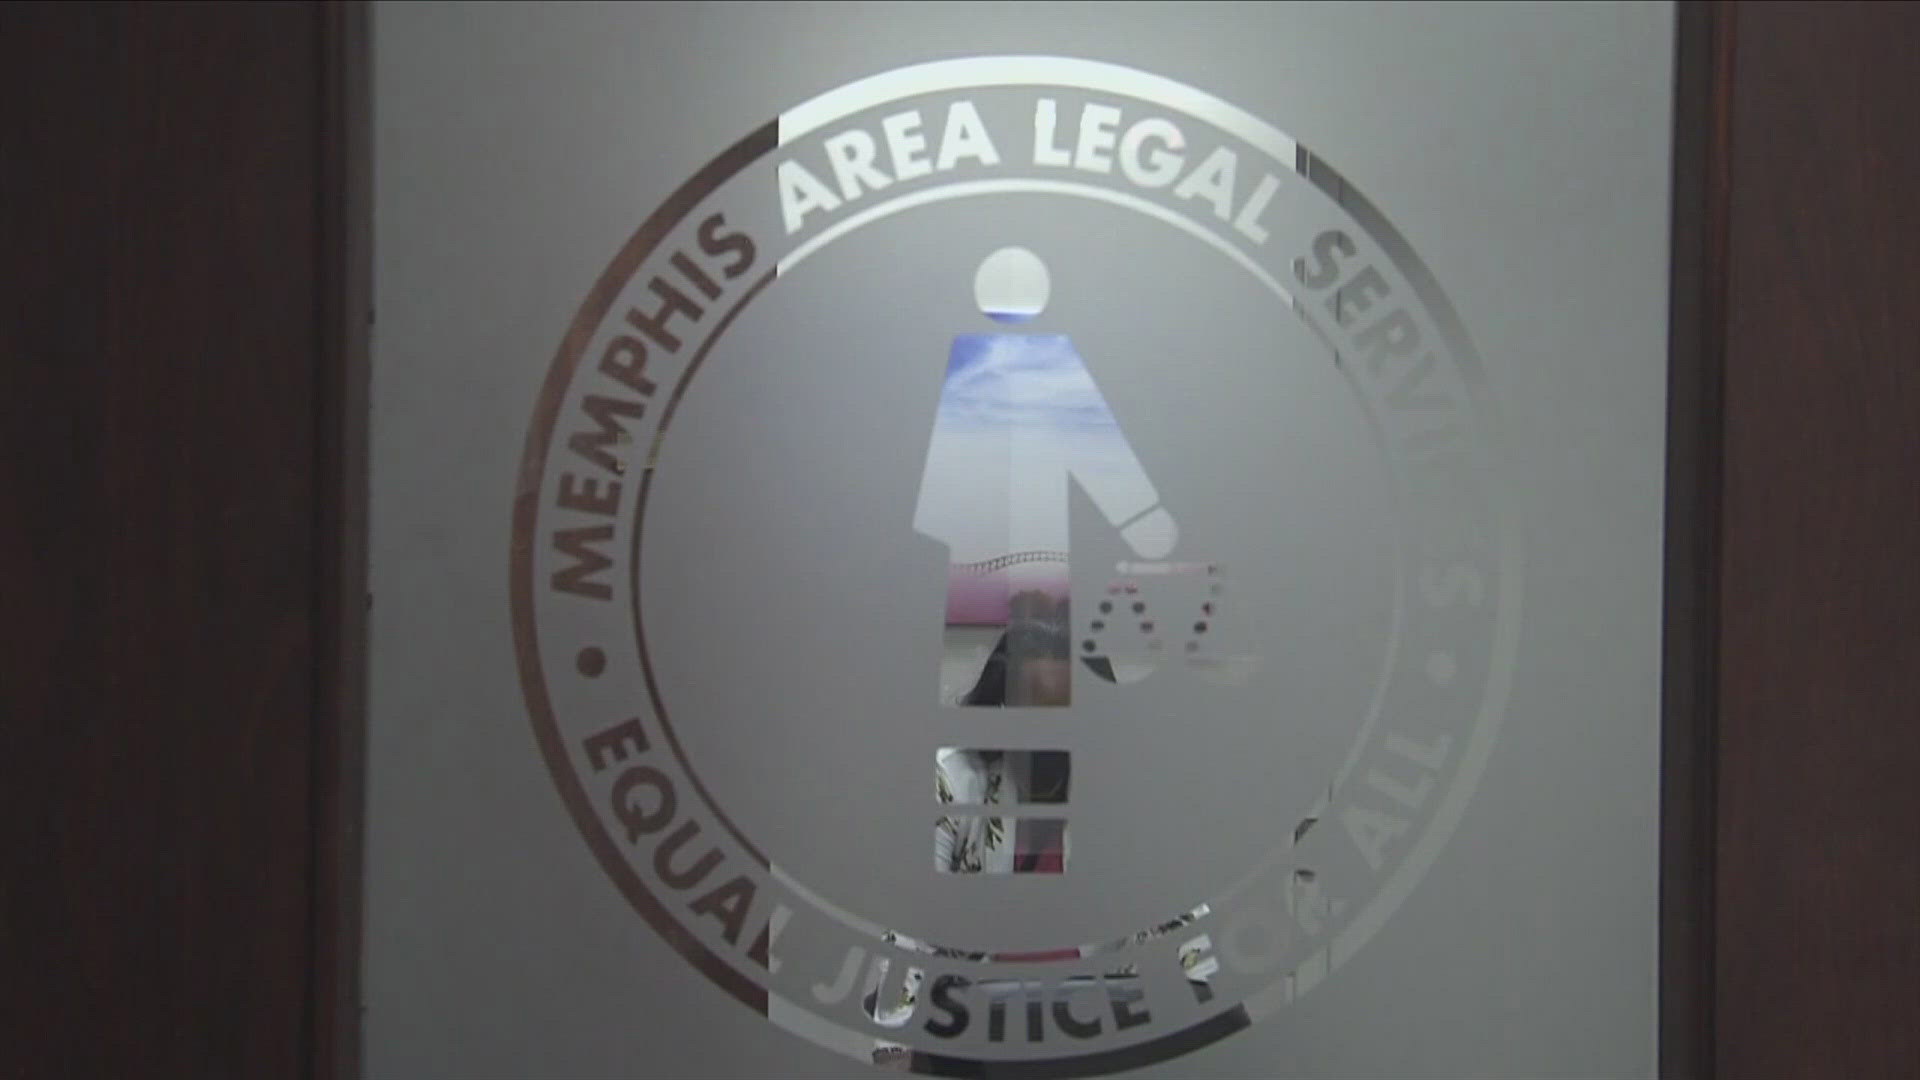 Memphis Area Legal Services (MALS), which represents hundreds of low-income people, is losing its largest source of funding starting June 30.